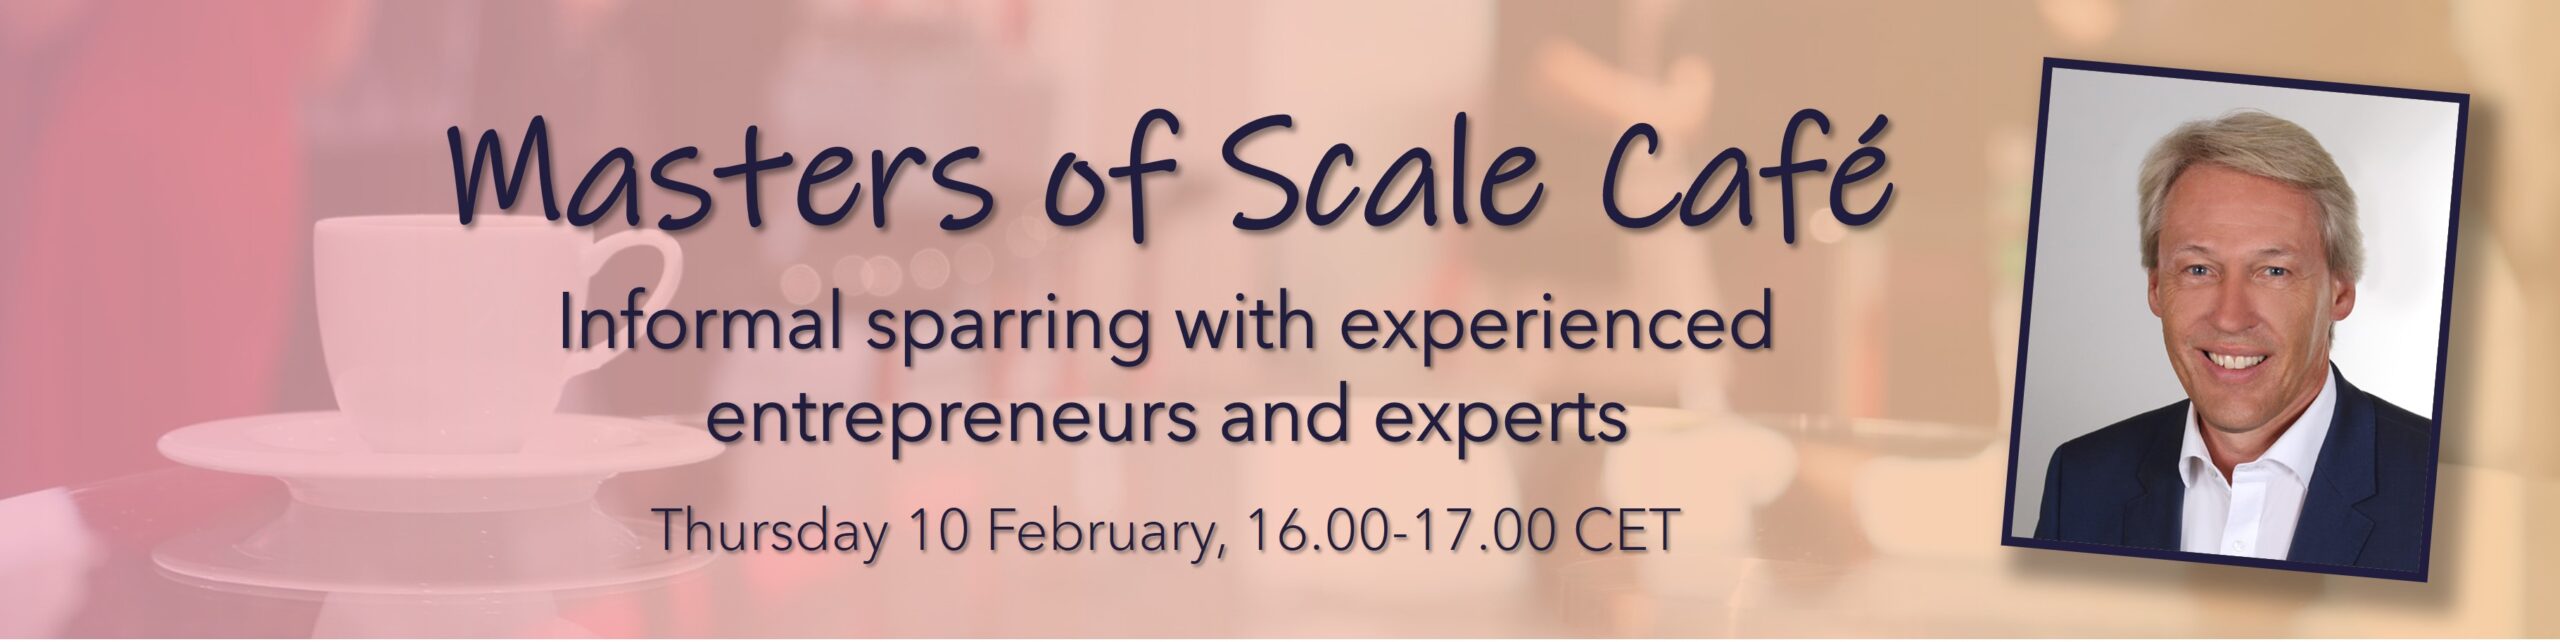 Masters of Scale Café with Peter Lennartz